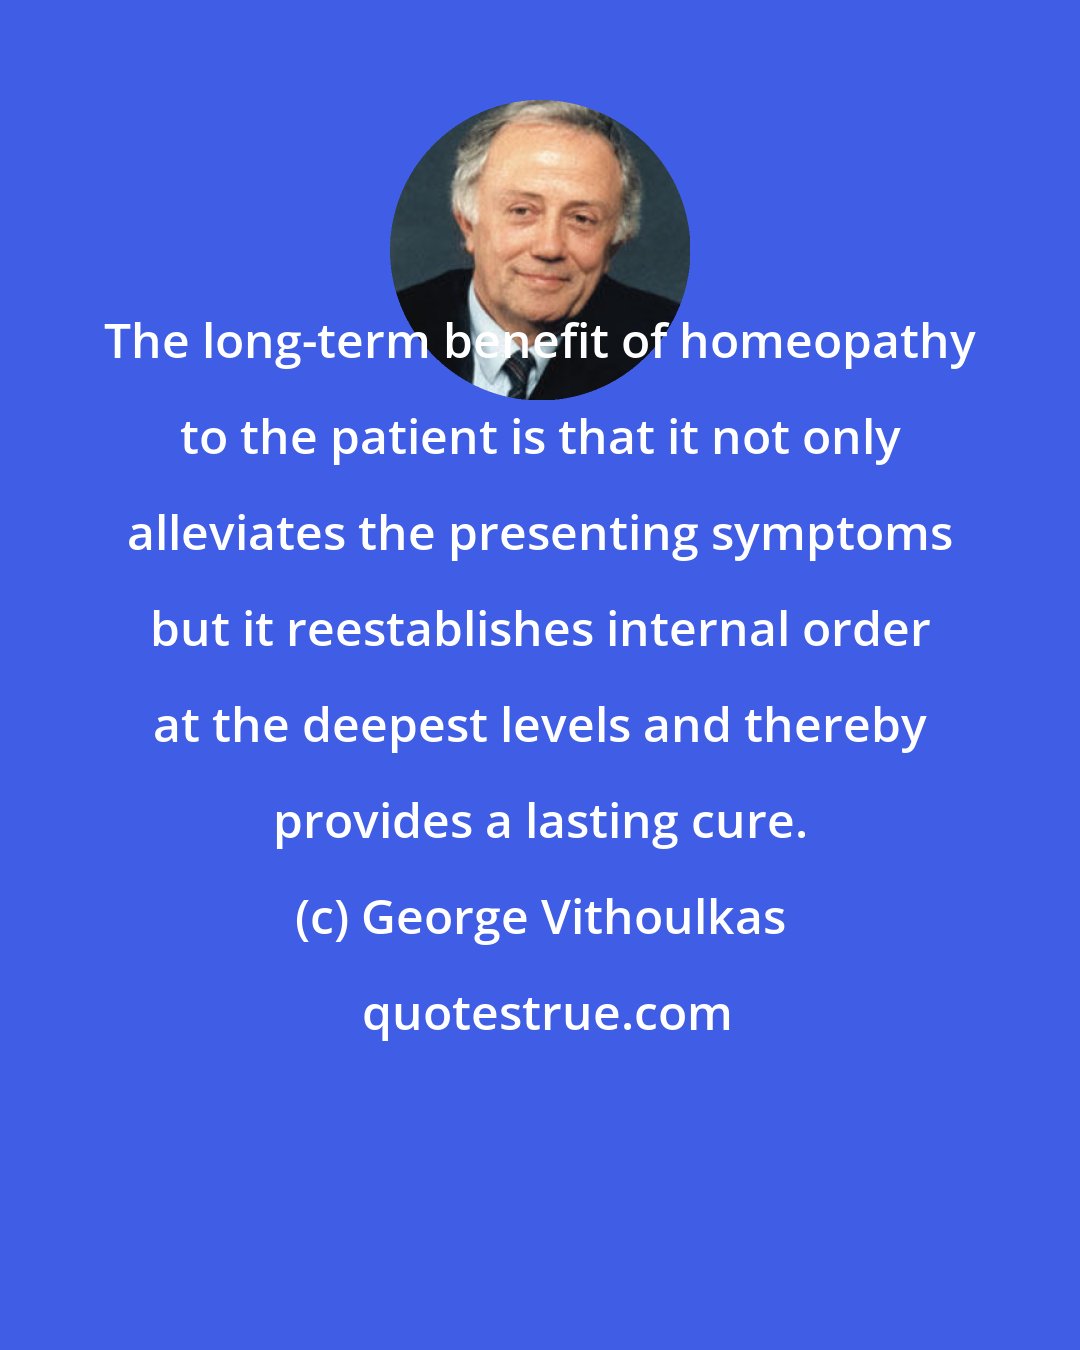 George Vithoulkas: The long-term benefit of homeopathy to the patient is that it not only alleviates the presenting symptoms but it reestablishes internal order at the deepest levels and thereby provides a lasting cure.